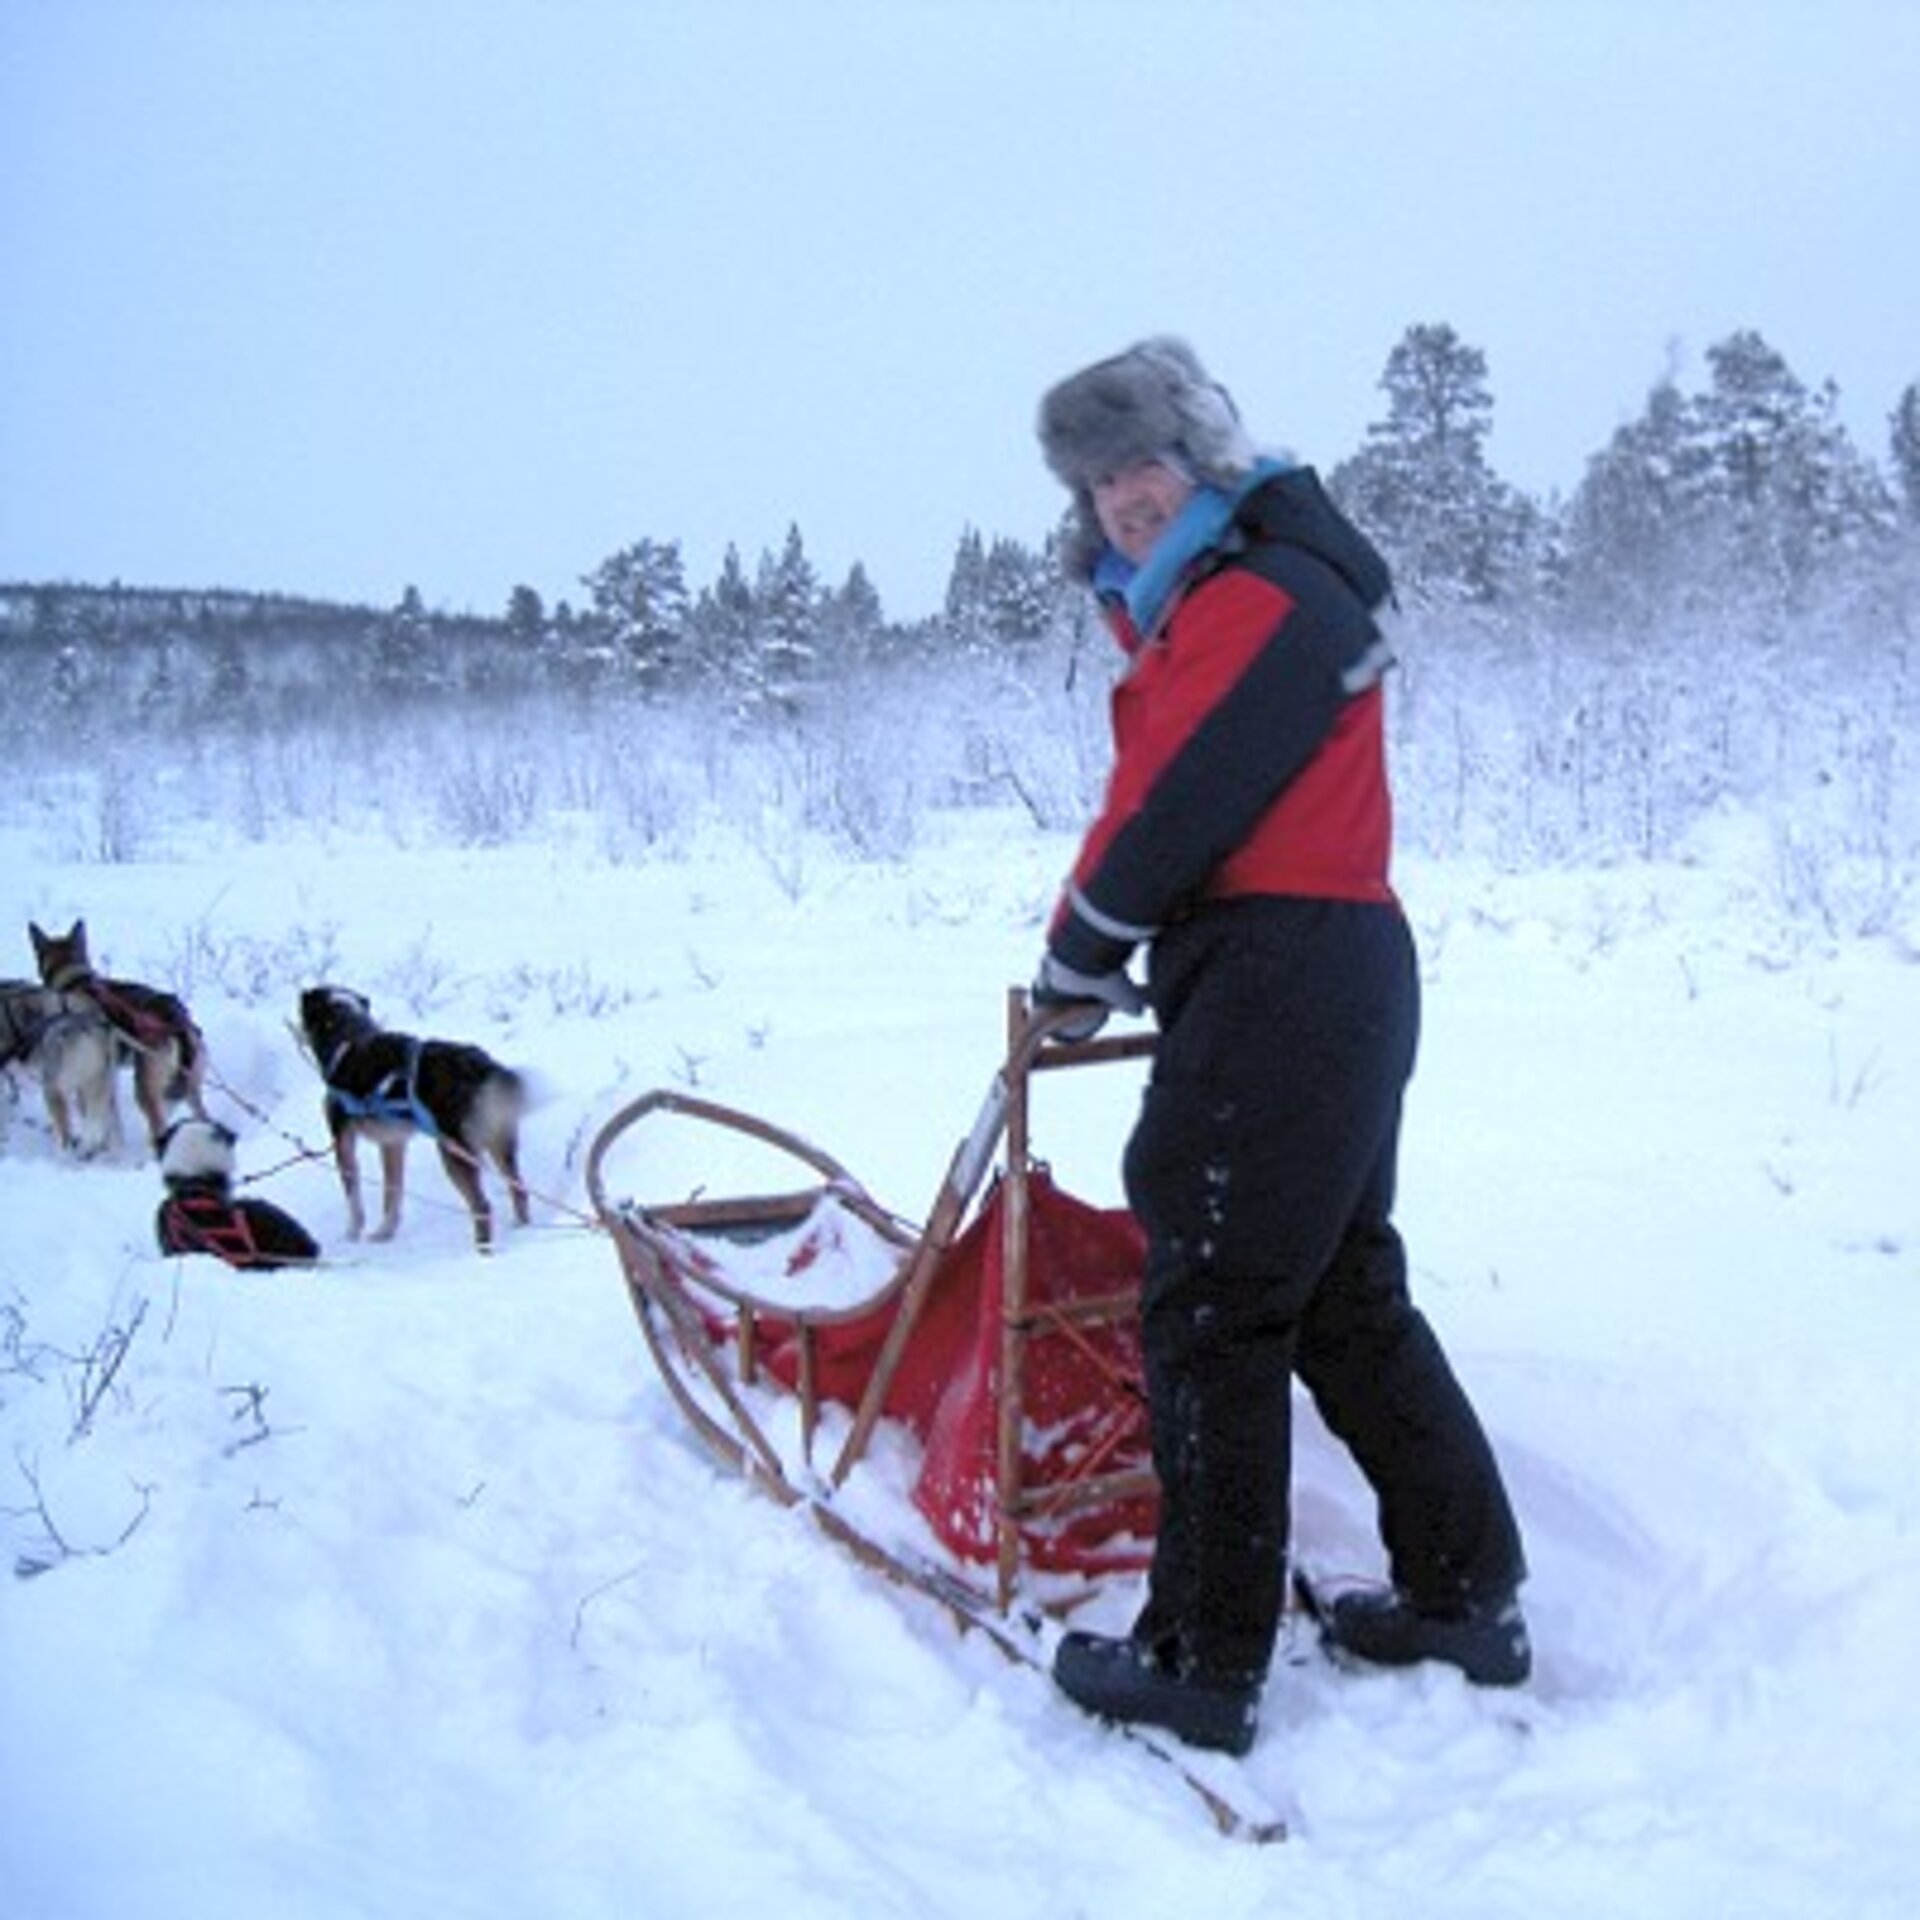 André Kuipers dog sledging during his holiday in Sweden